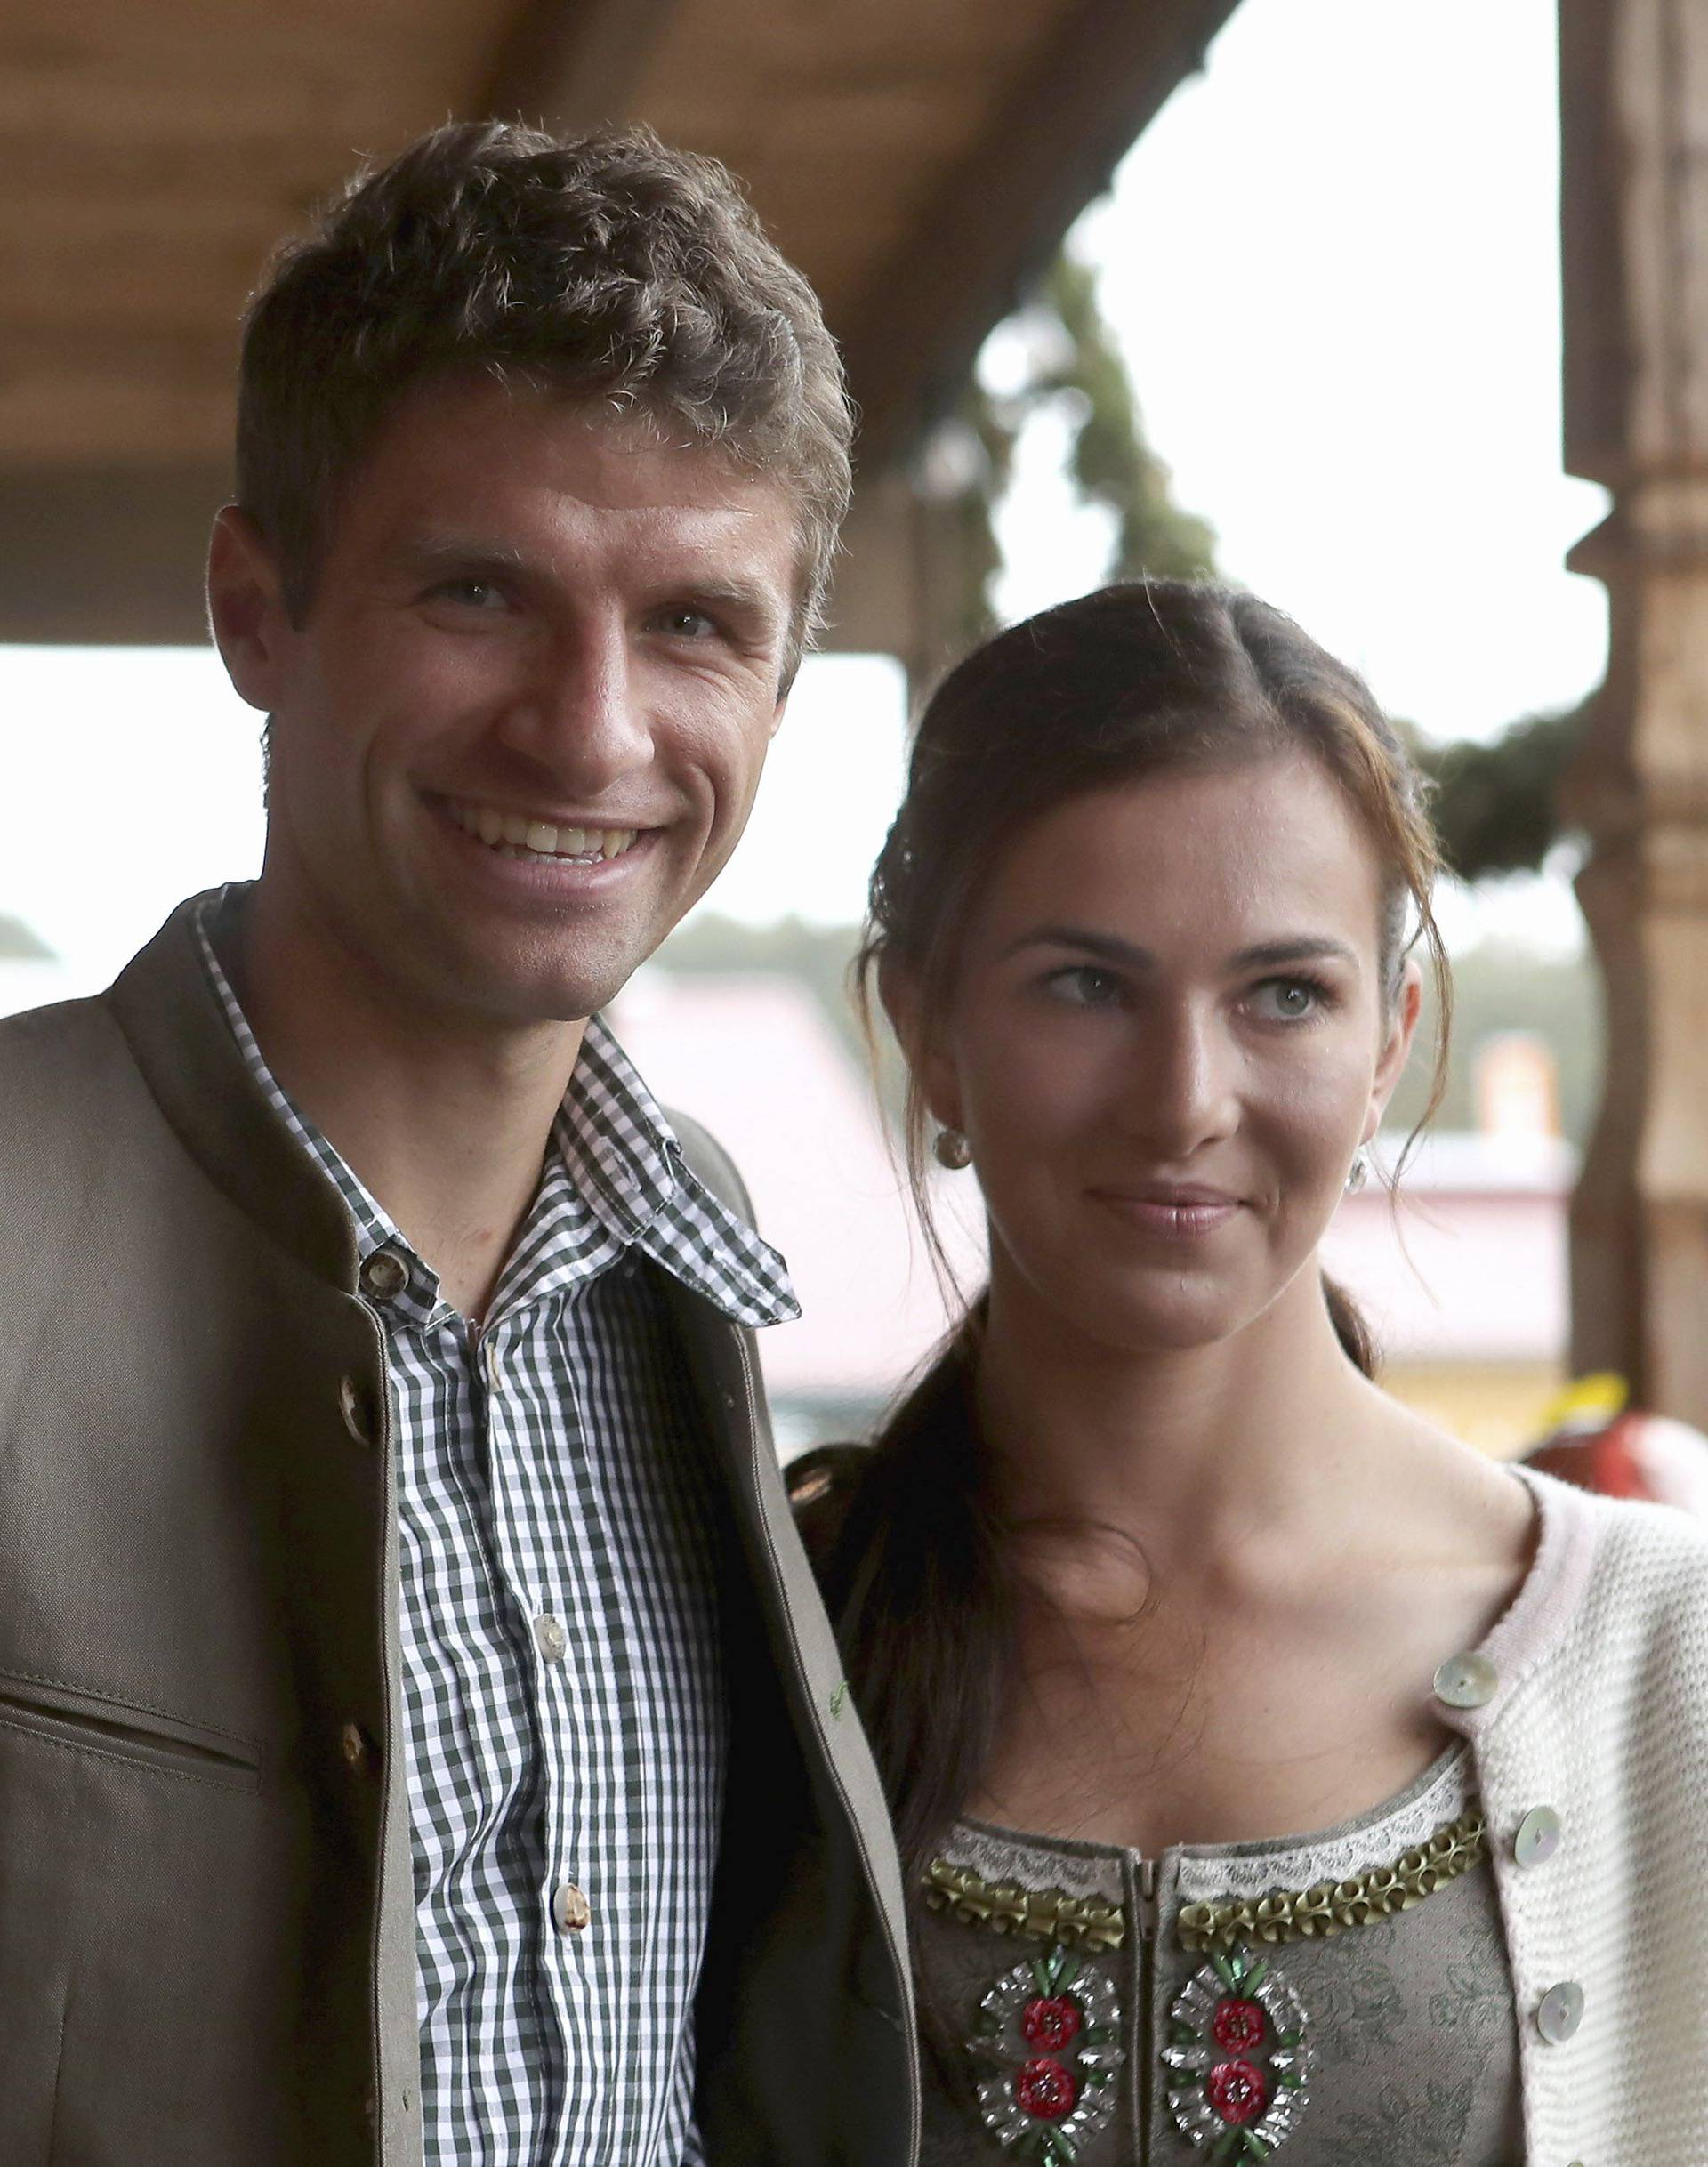 Mueller of FC Bayern Muenchen and his wife Lisa pose during their visit at the Oktoberfest in Munich